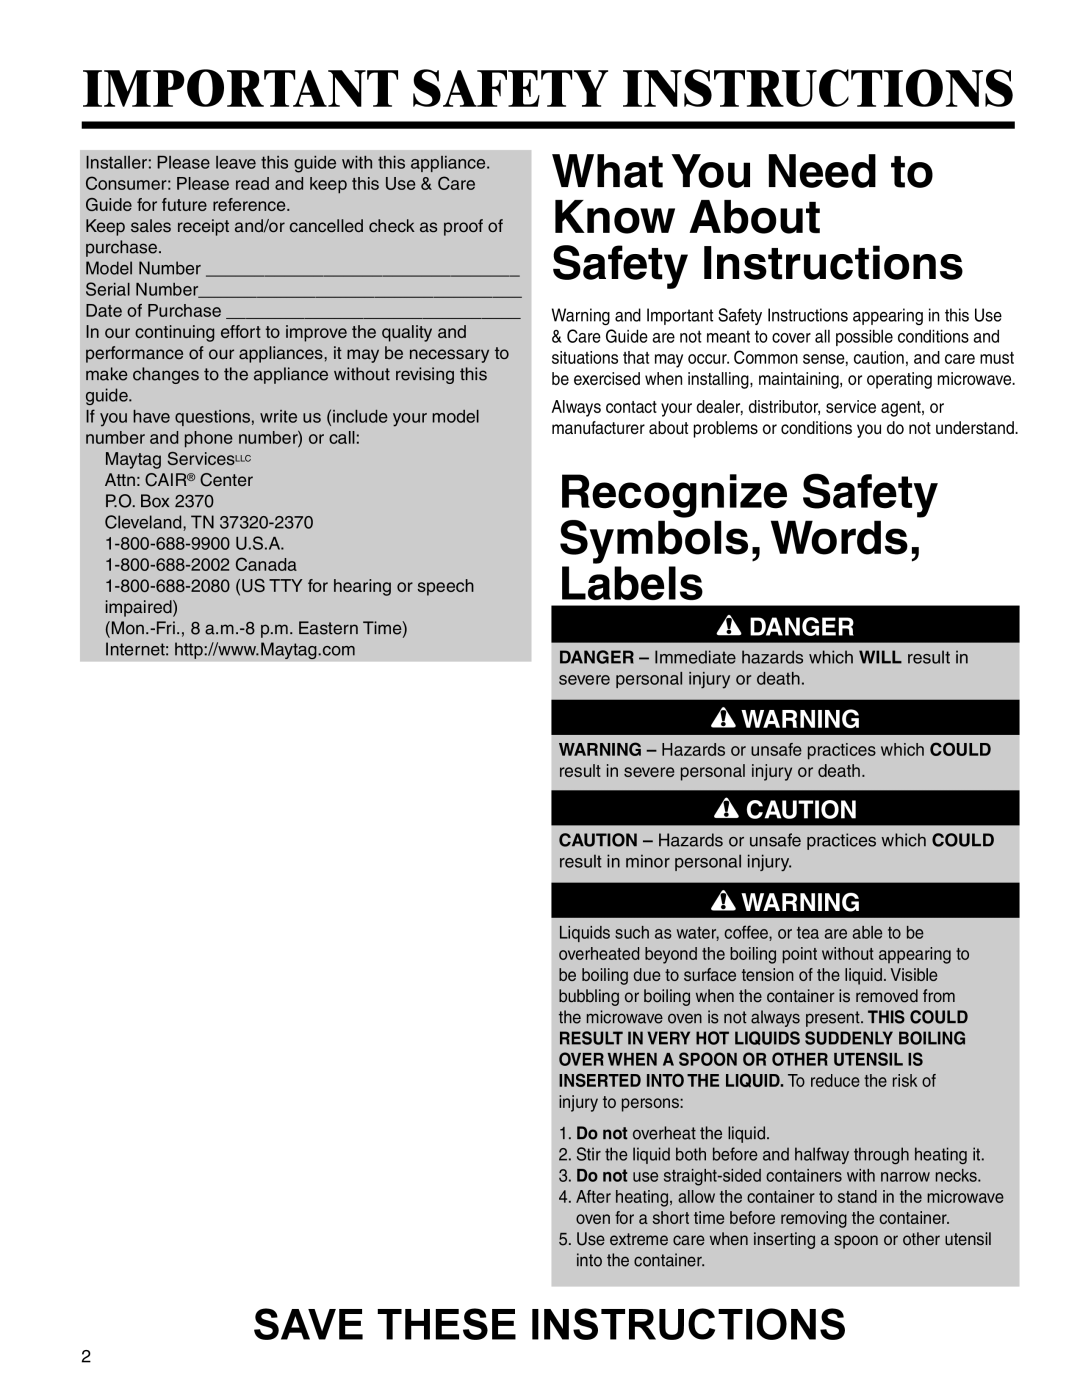 Maytag UMC5200 BCB/W/S Important Safety Instructions, What You Need to Know About Safety Instructions, Danger 